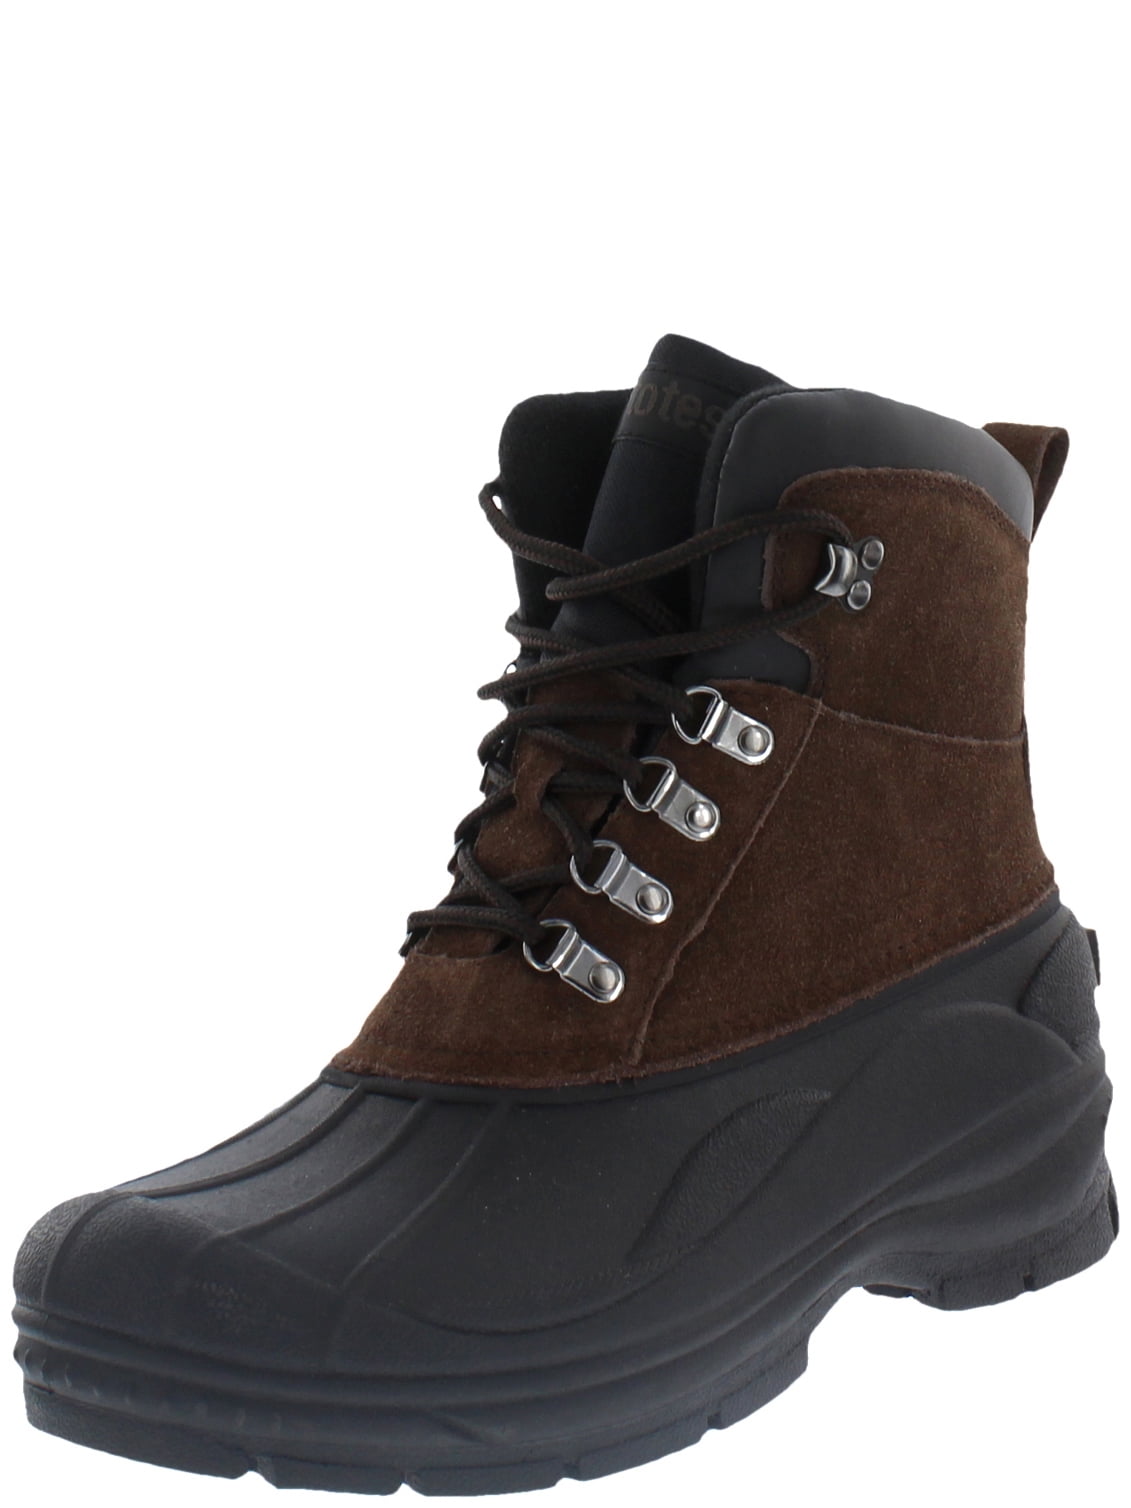 mens wide width snow boots